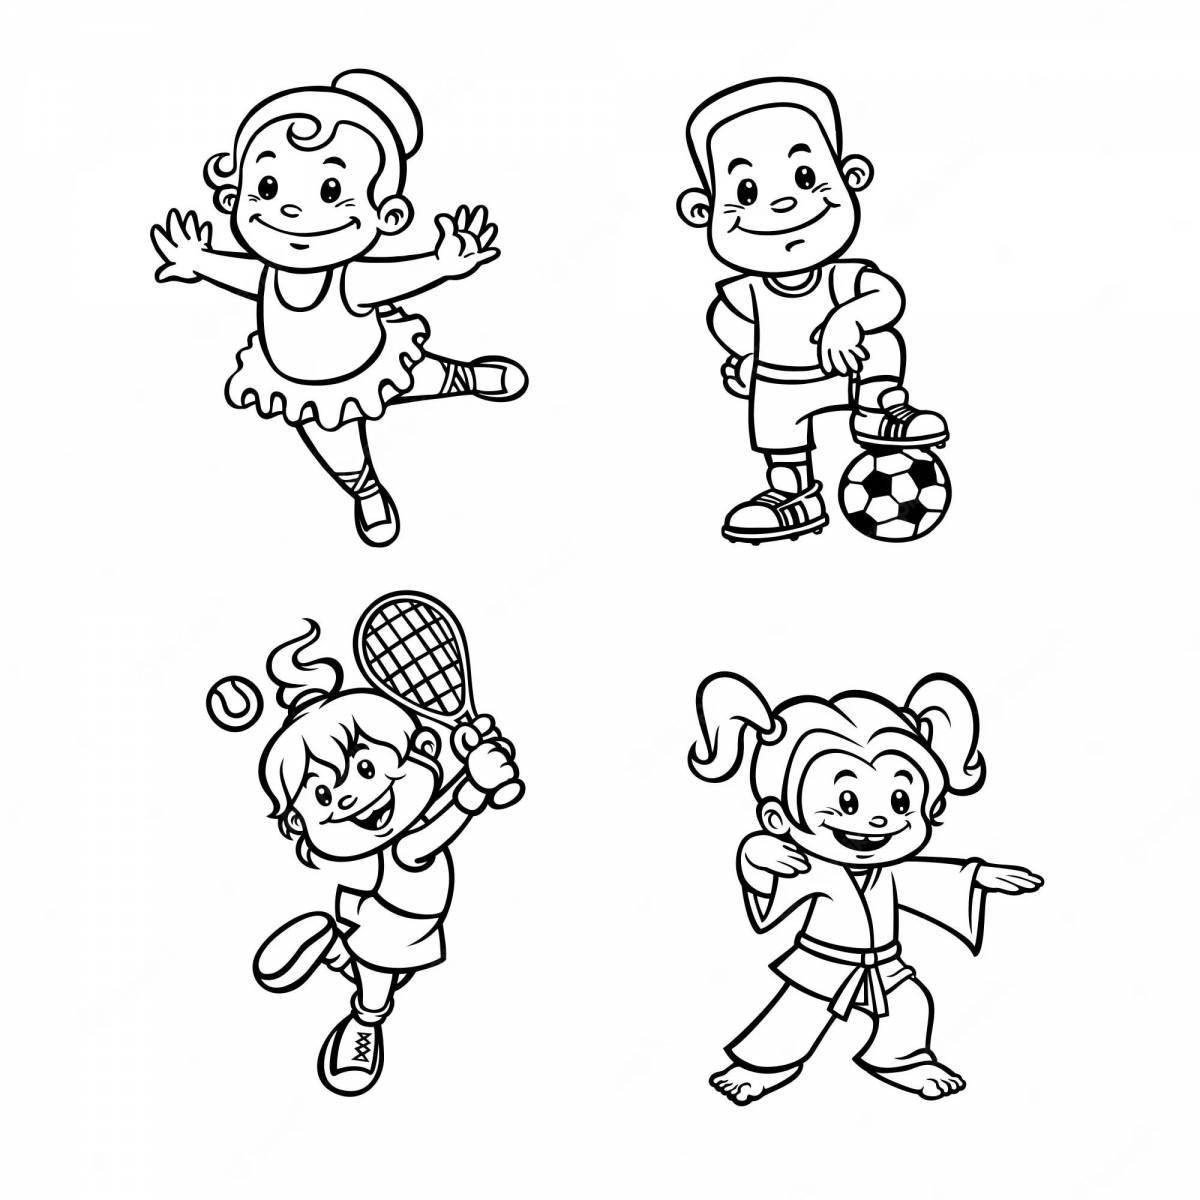 Creative sports coloring book for kids